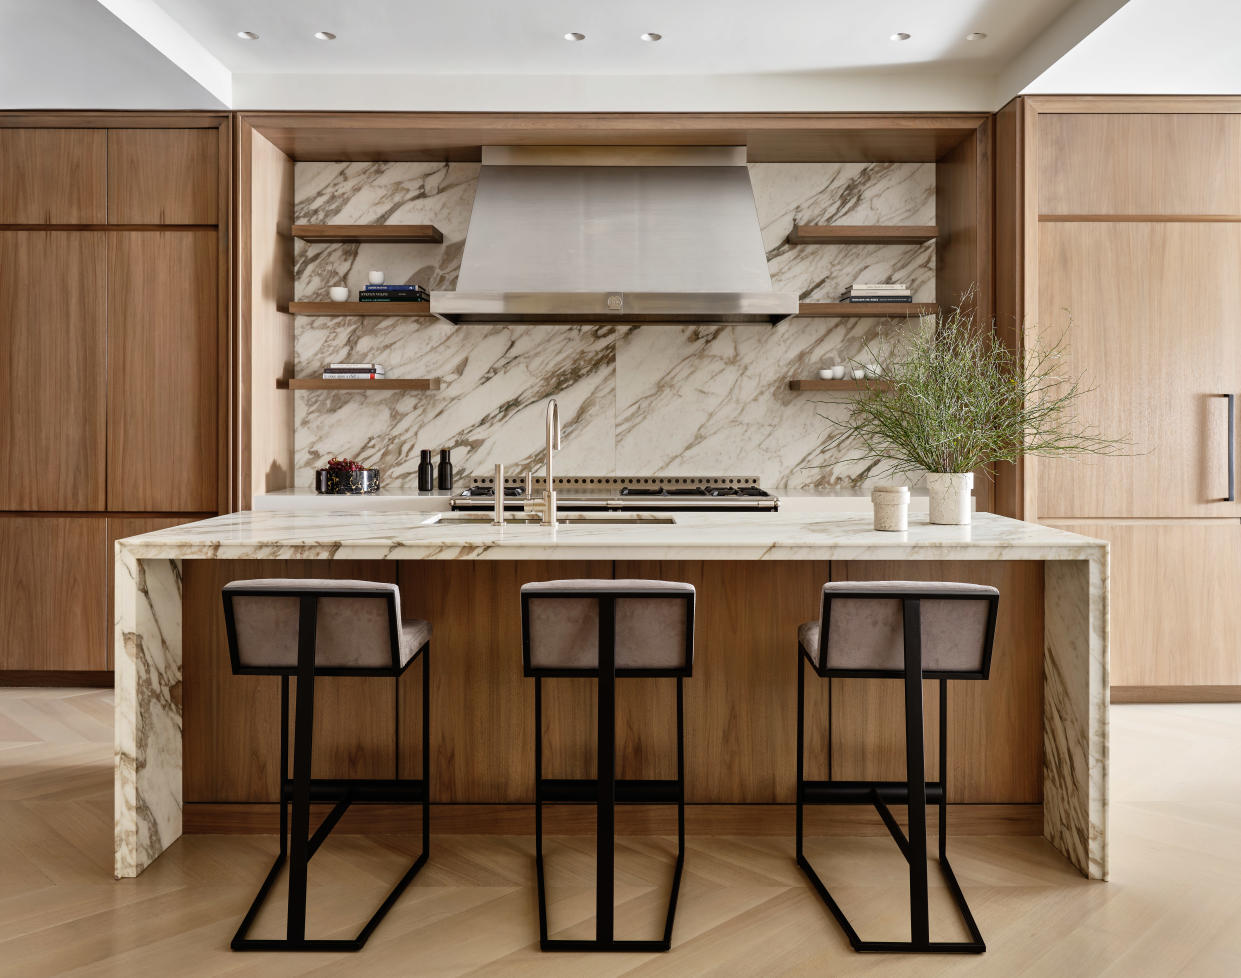  A kitchen with tall stools as island seating. 